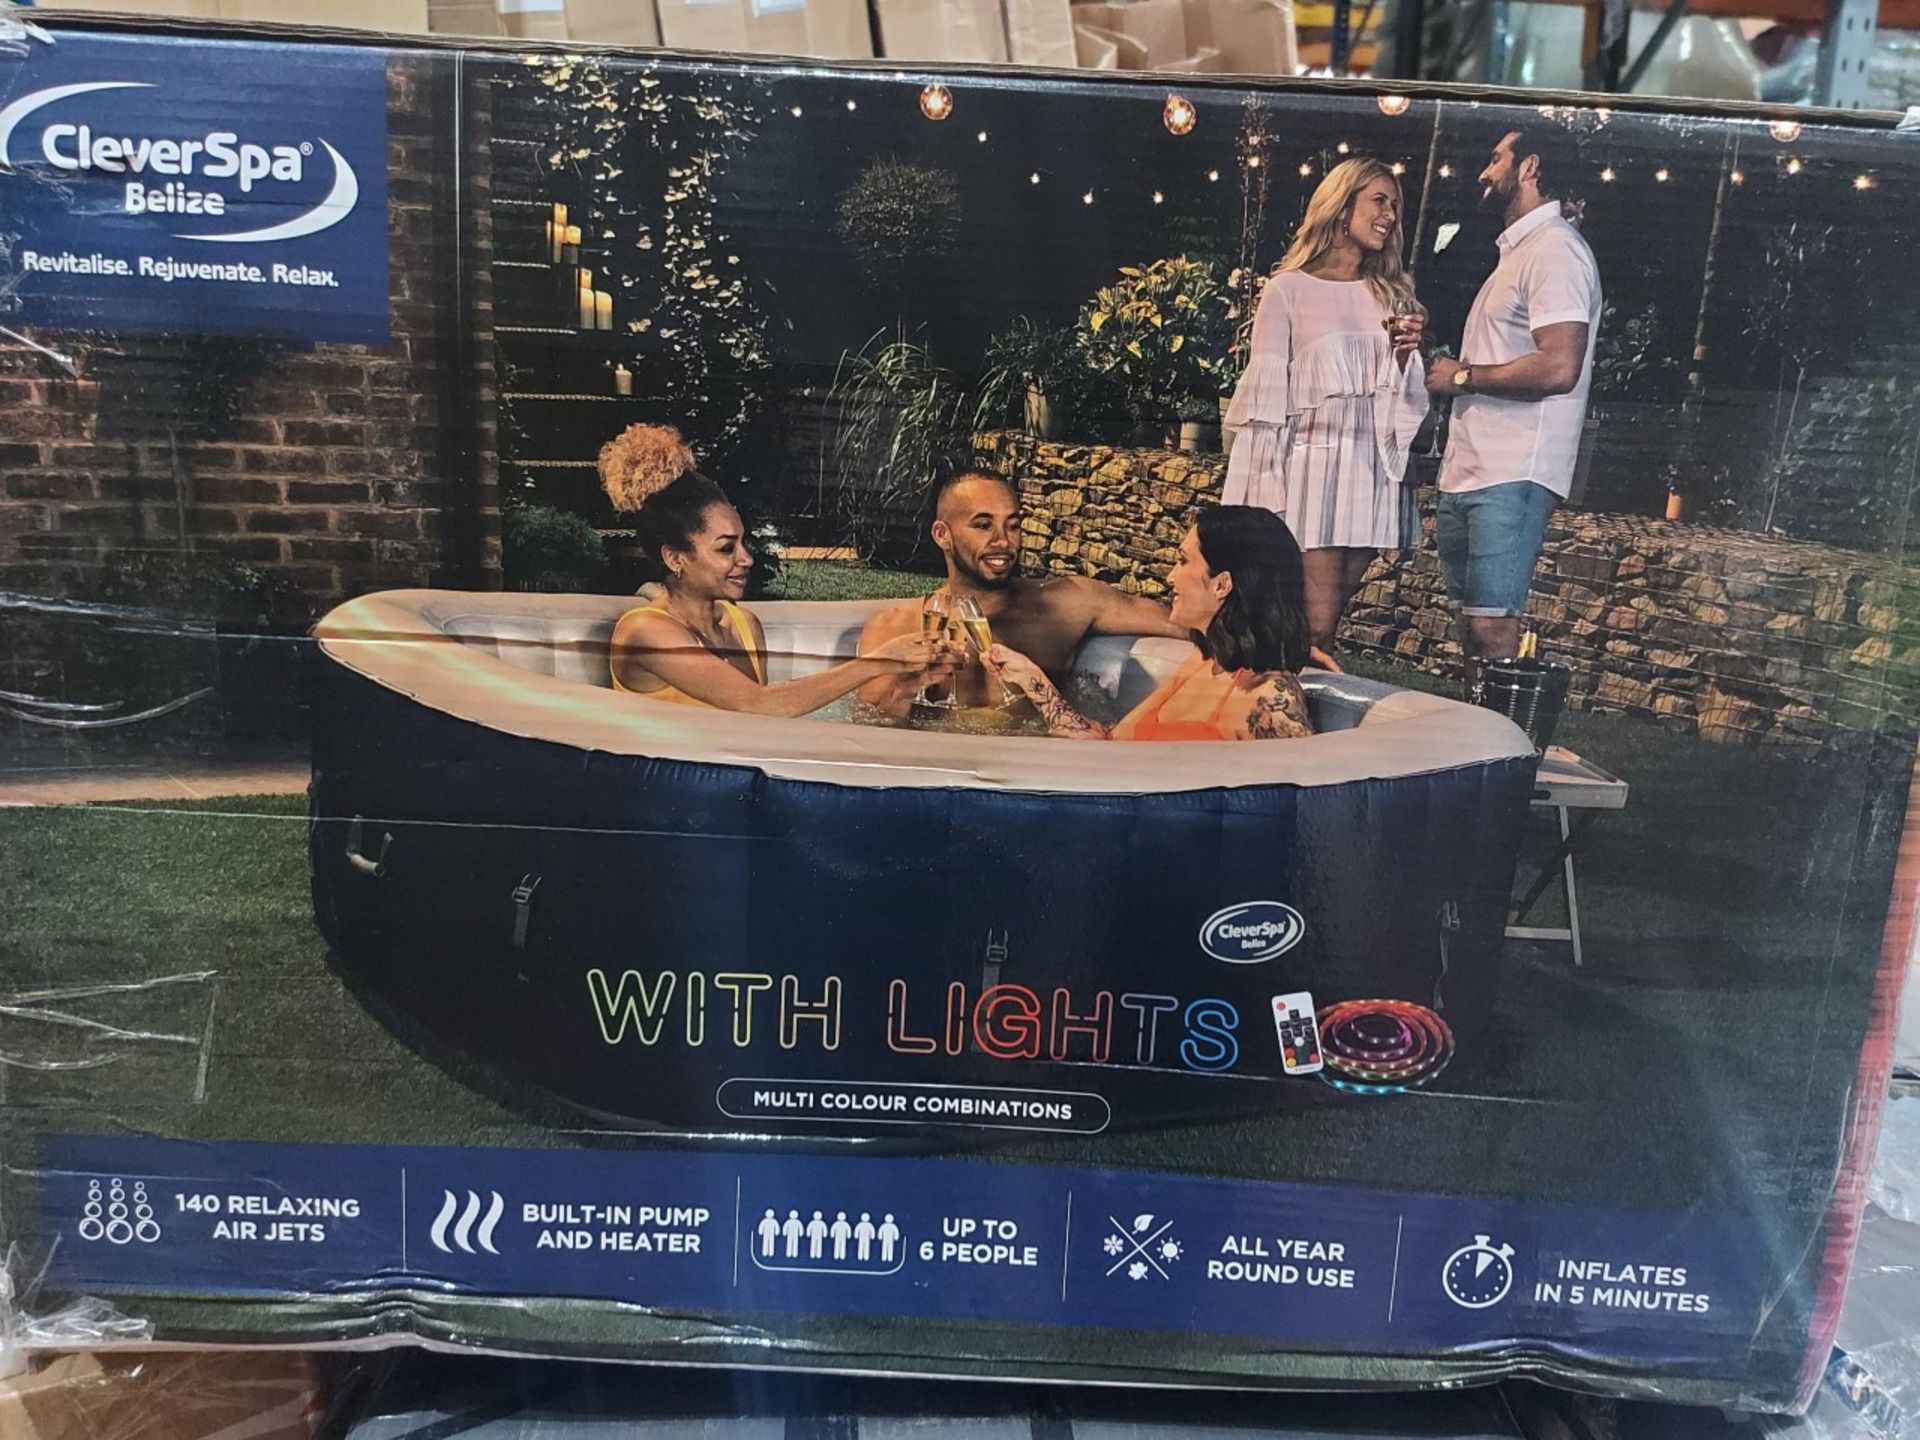 BOXED CLEVERSPA BELIZE 6 PERSON INFLATABLE HOT TUB WITH LIGHTS. RRP £652. UNCHECKED/UNTESTED